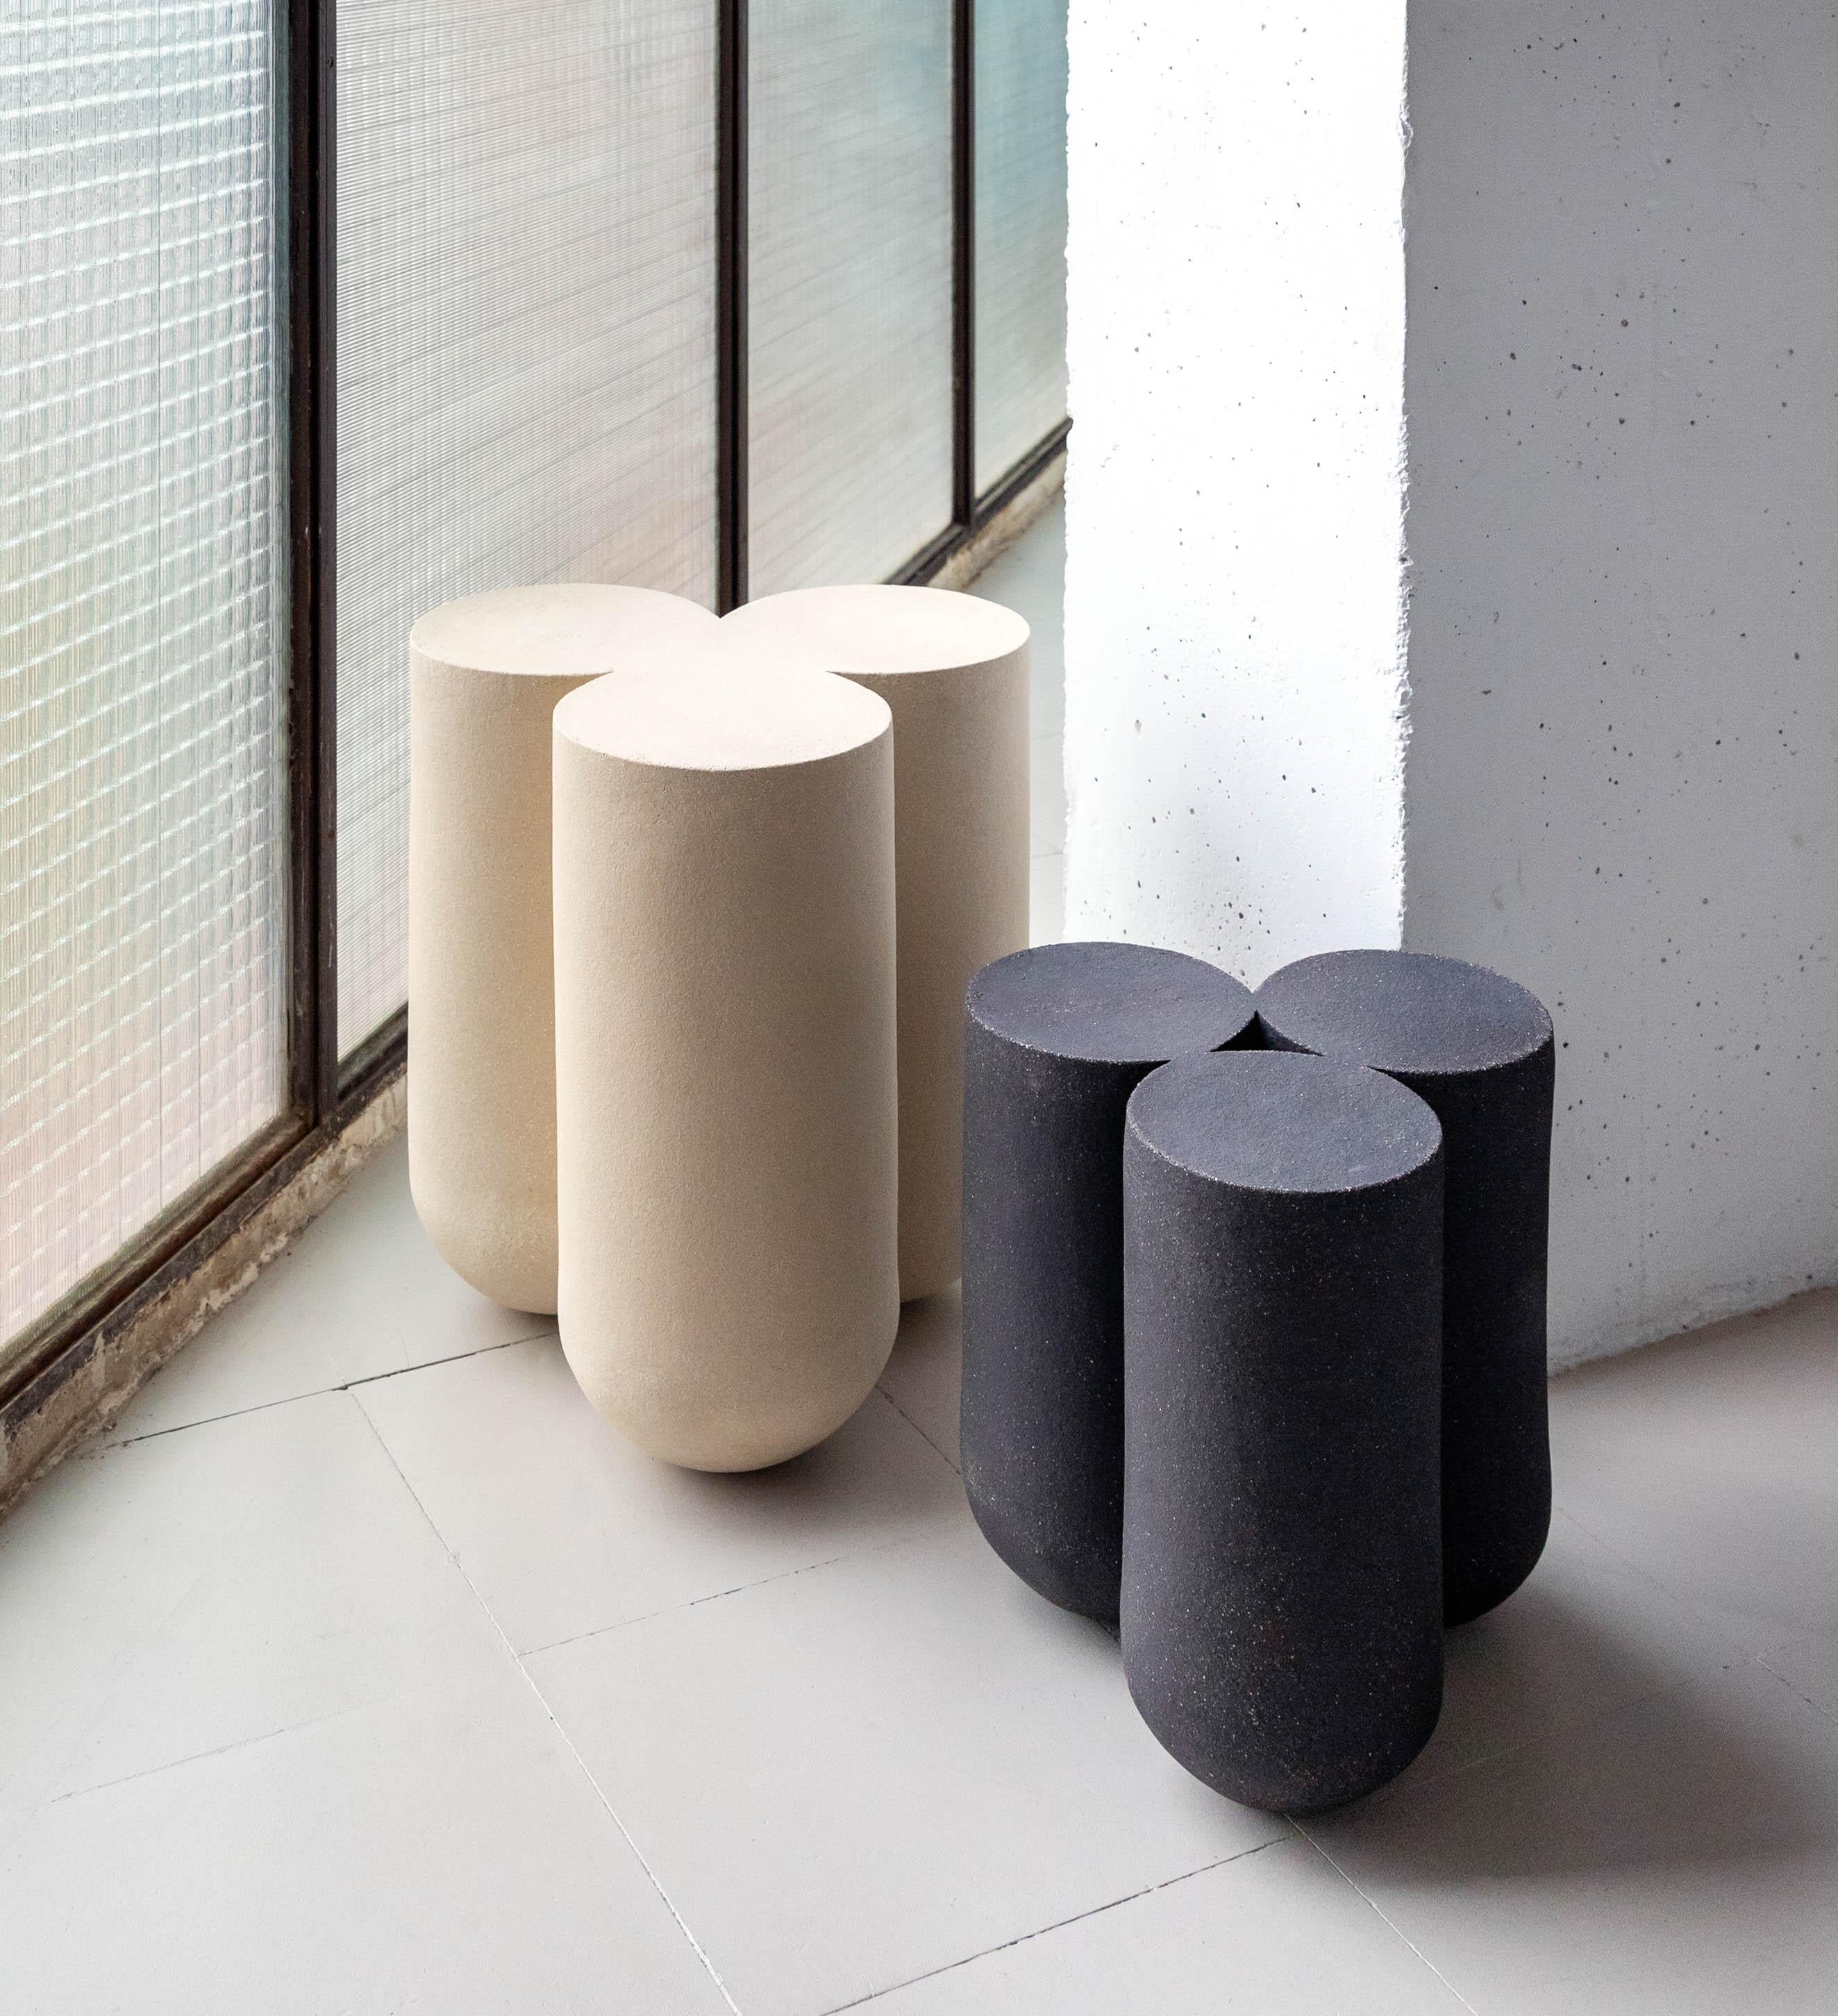 Set of 2 clay moor side tables by Lisa Allegra
Moor collection
Dimensions: ø 42 x 47 cm
Materials: Clay

Born in 1986 in Paris, Lisa Allegra has earned in 2010 a degree in furniture design from the École Supérieure des Arts Décoratifs. She has